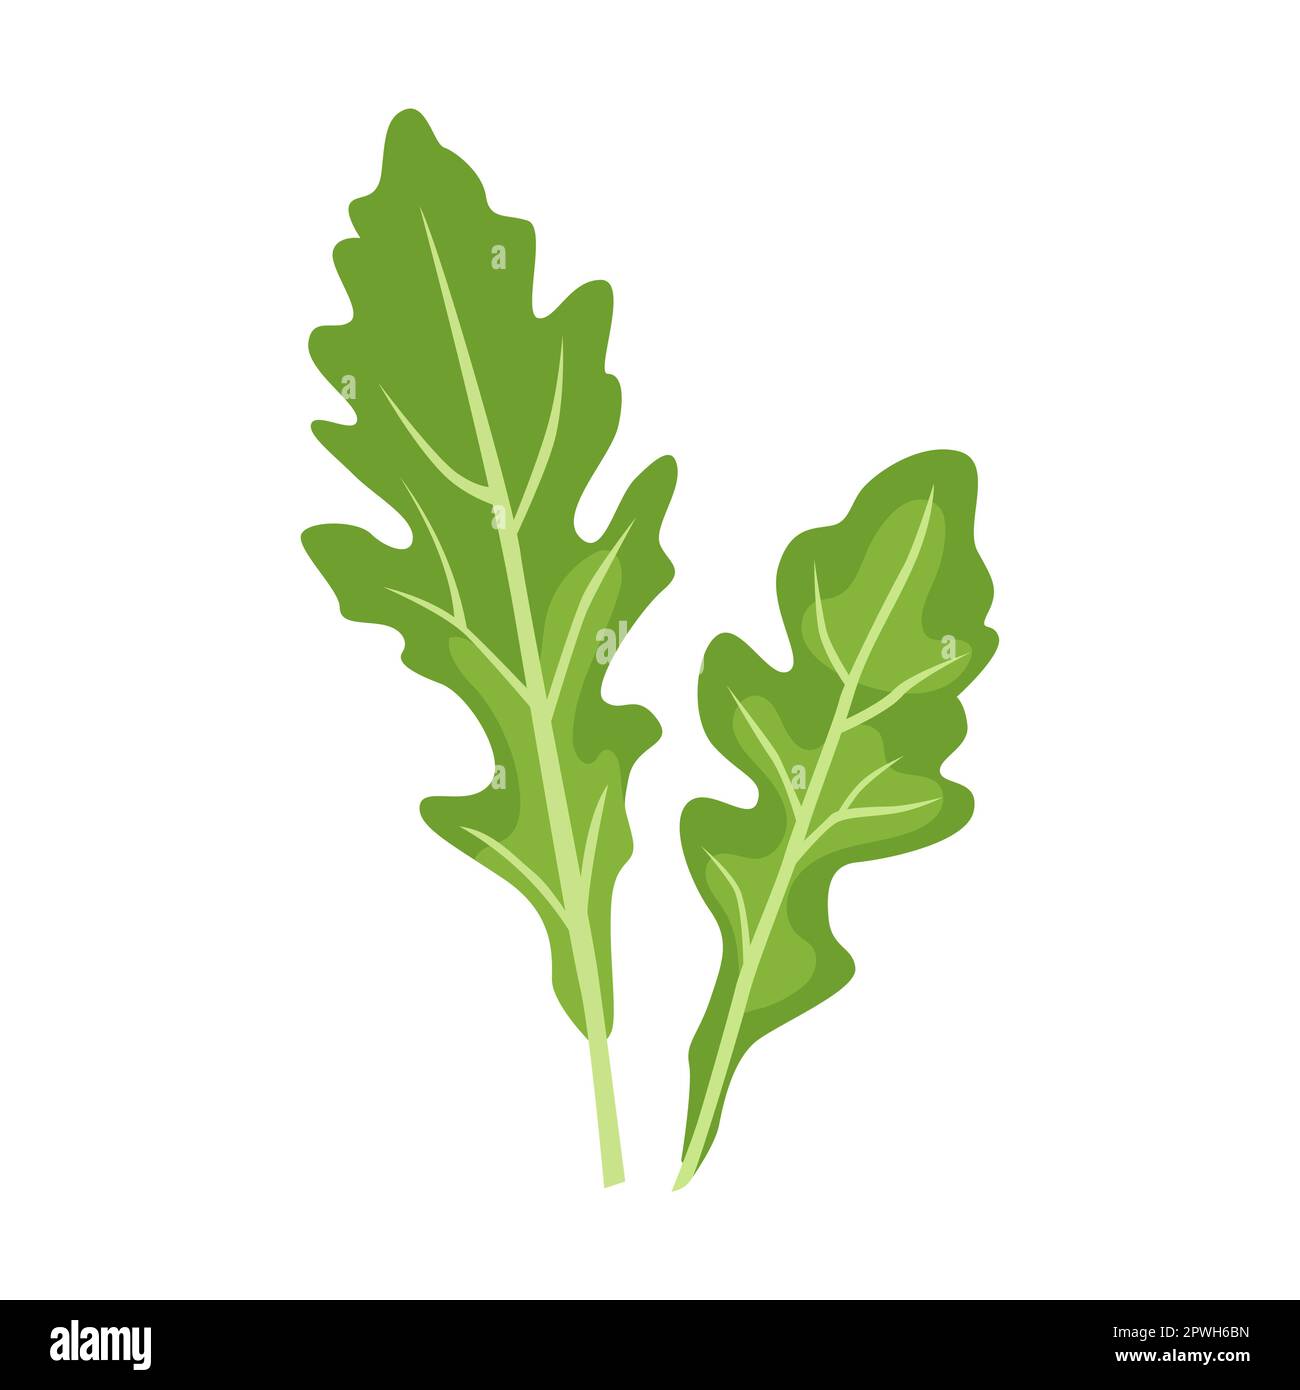 Herb and leaves vector illustration. Spicy herbal plants, parsley, rosemary, coriander, oregano, mint on white background Stock Vector